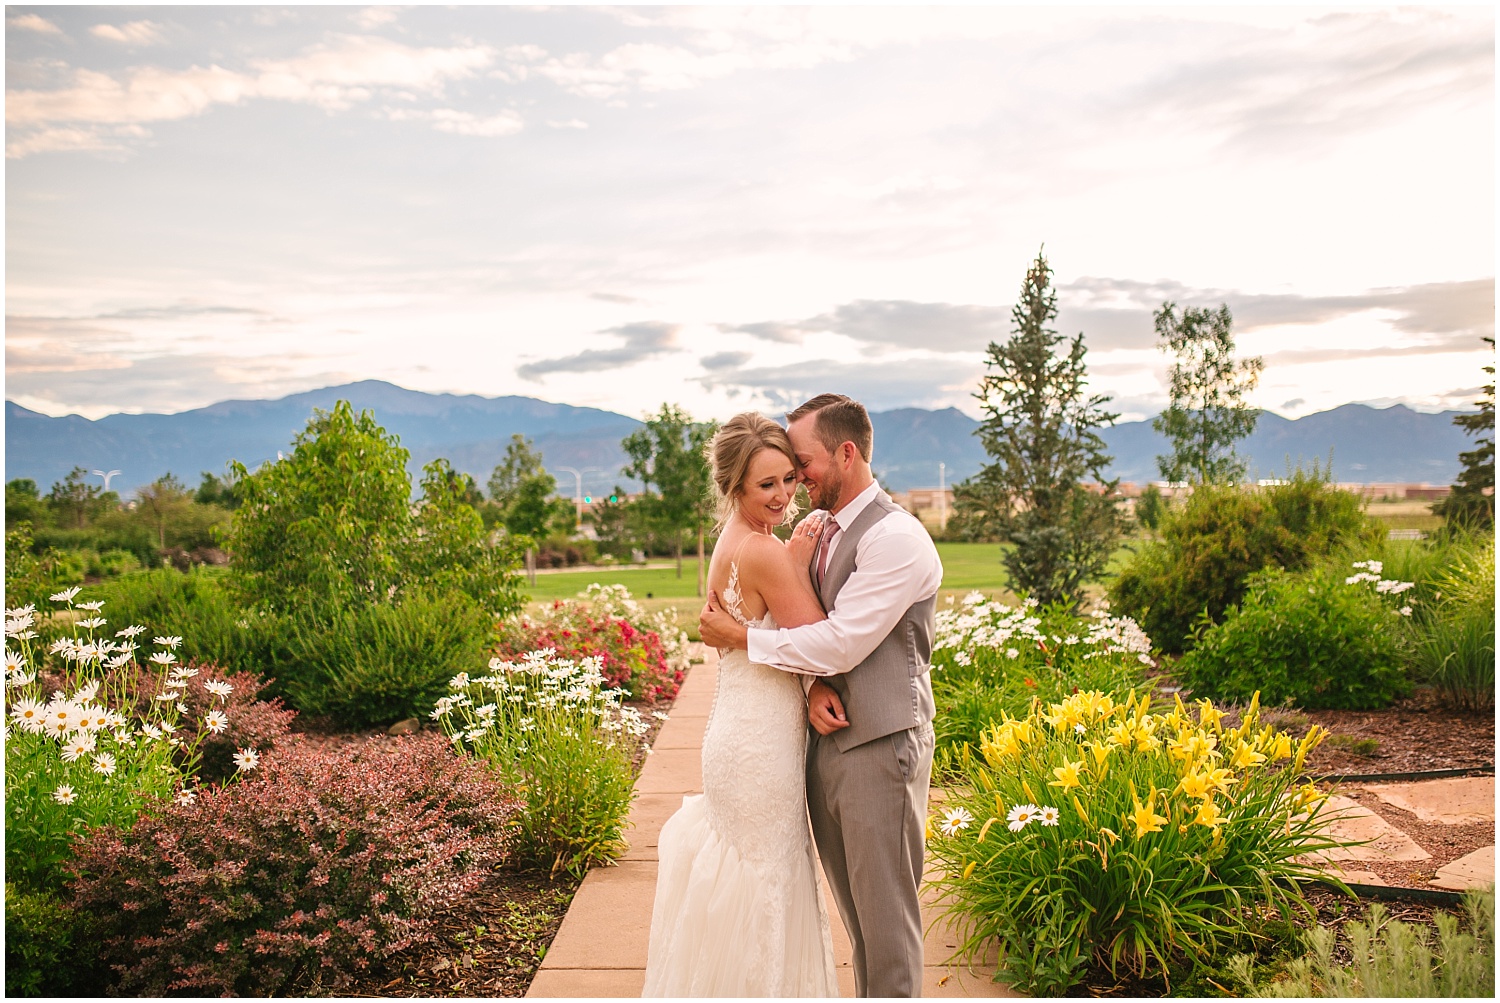 Bride and groom hugging surrounded by flowers and mountains in Colorado Springs